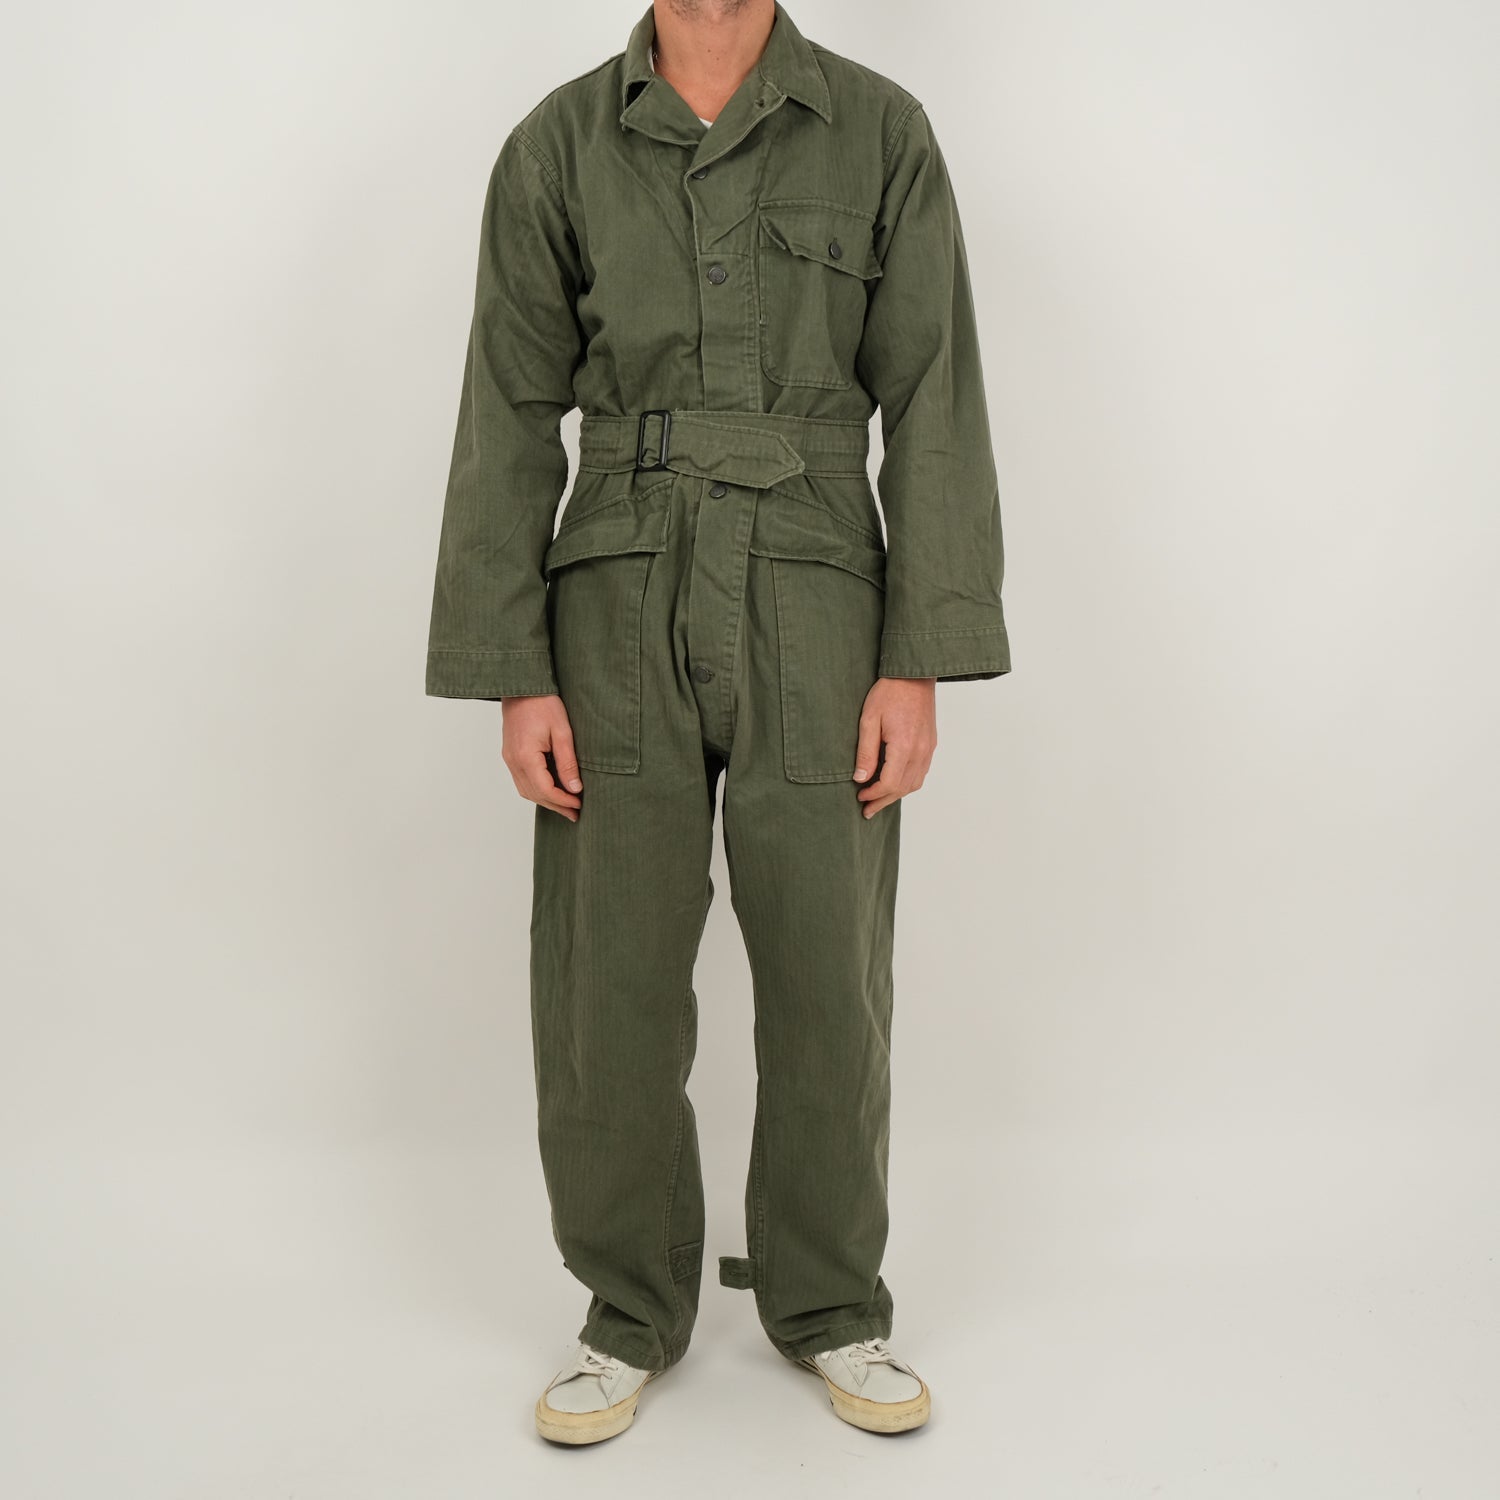 HBT COVERALL | Universal Surplus best vintage military army store